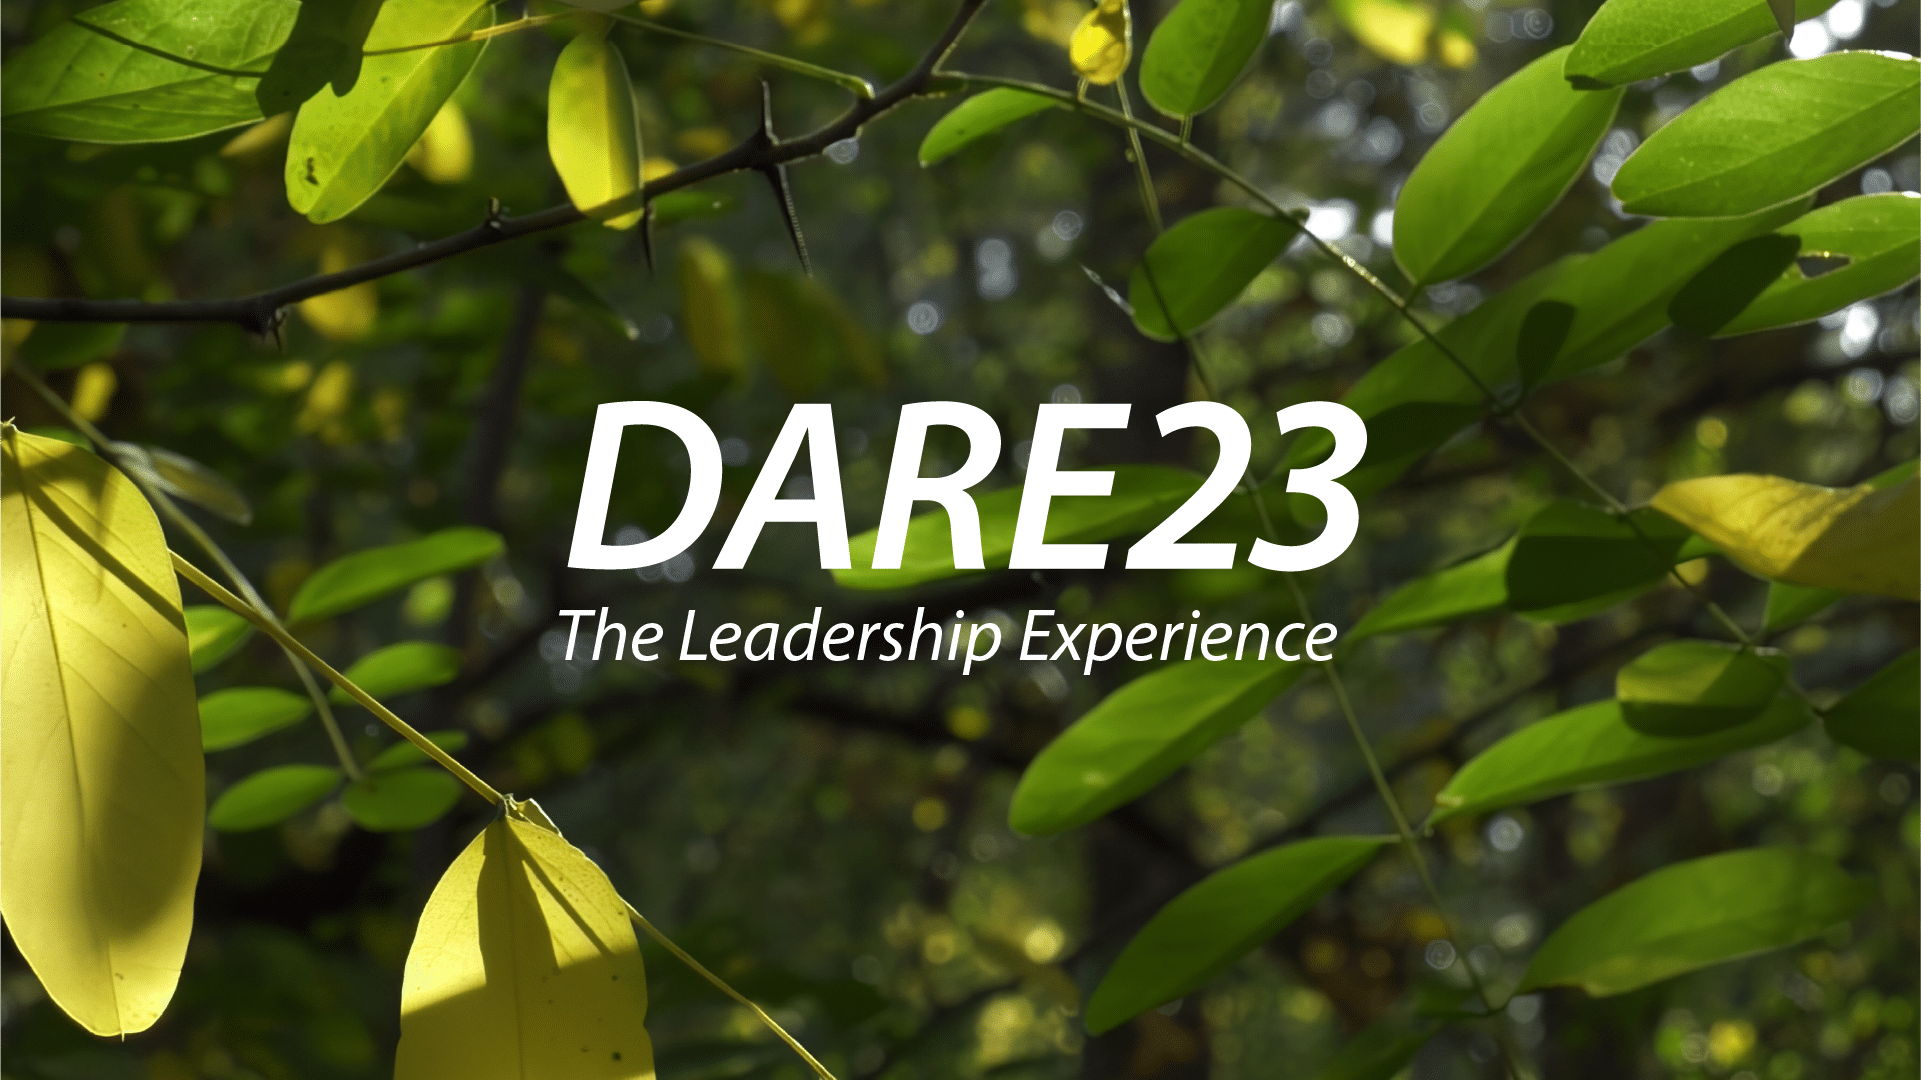 Rabobank DARE23 - The Leadership Experience.